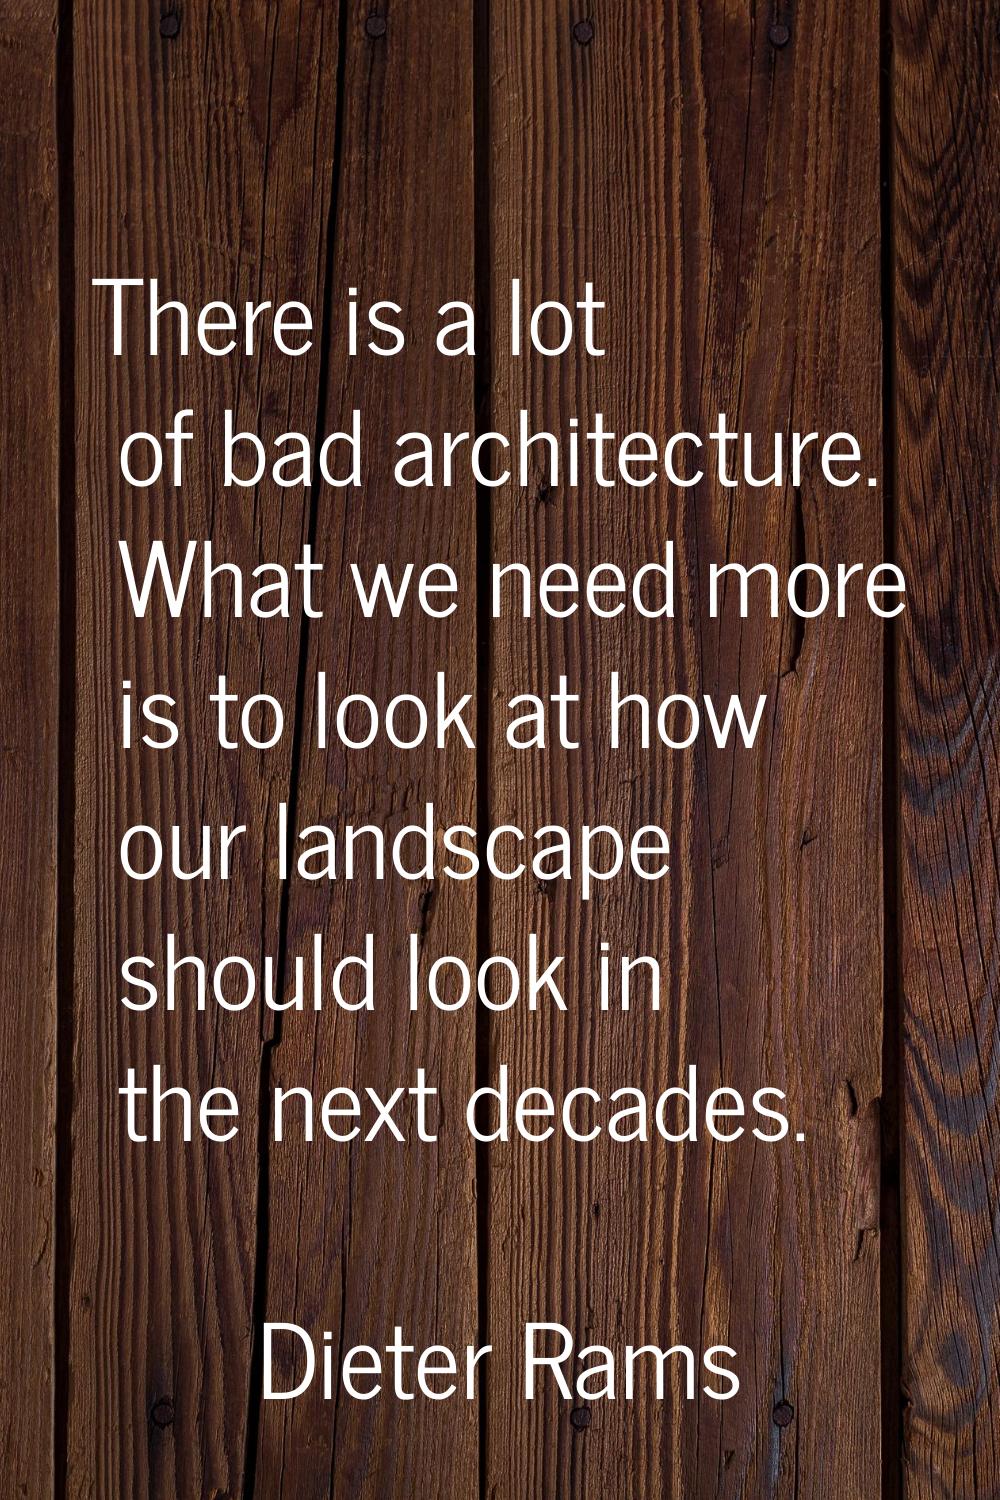 There is a lot of bad architecture. What we need more is to look at how our landscape should look i